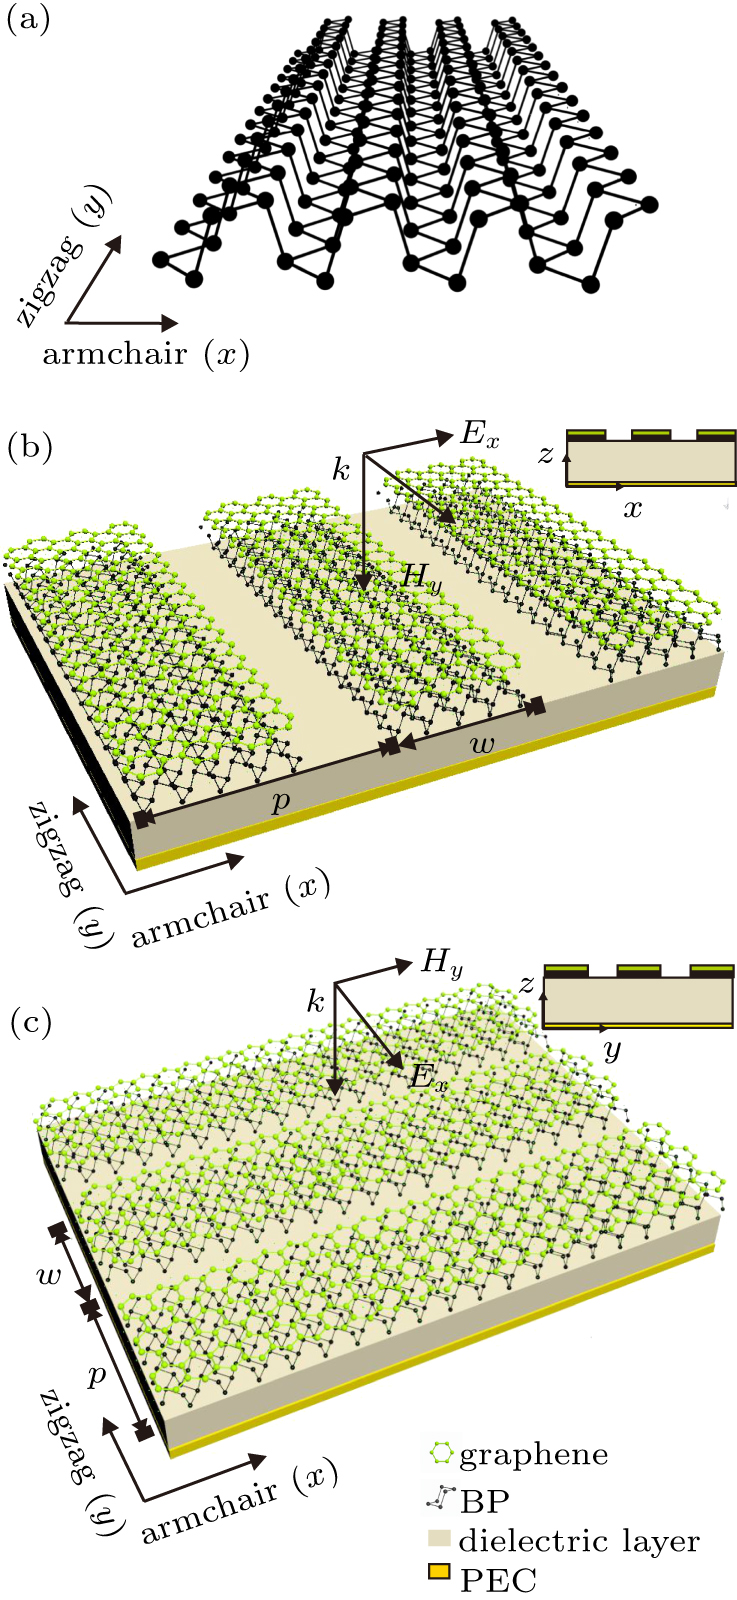 Schematics of graphene–black phosphorus heterostructure. (a) Schematic of monolayer BP atom structure with armchair direction along x axis and zigzag direction along y axis. Schematic of the periodic structure consisting of GB nanoribbons along armchair direction (b) and zigzag direction (c).